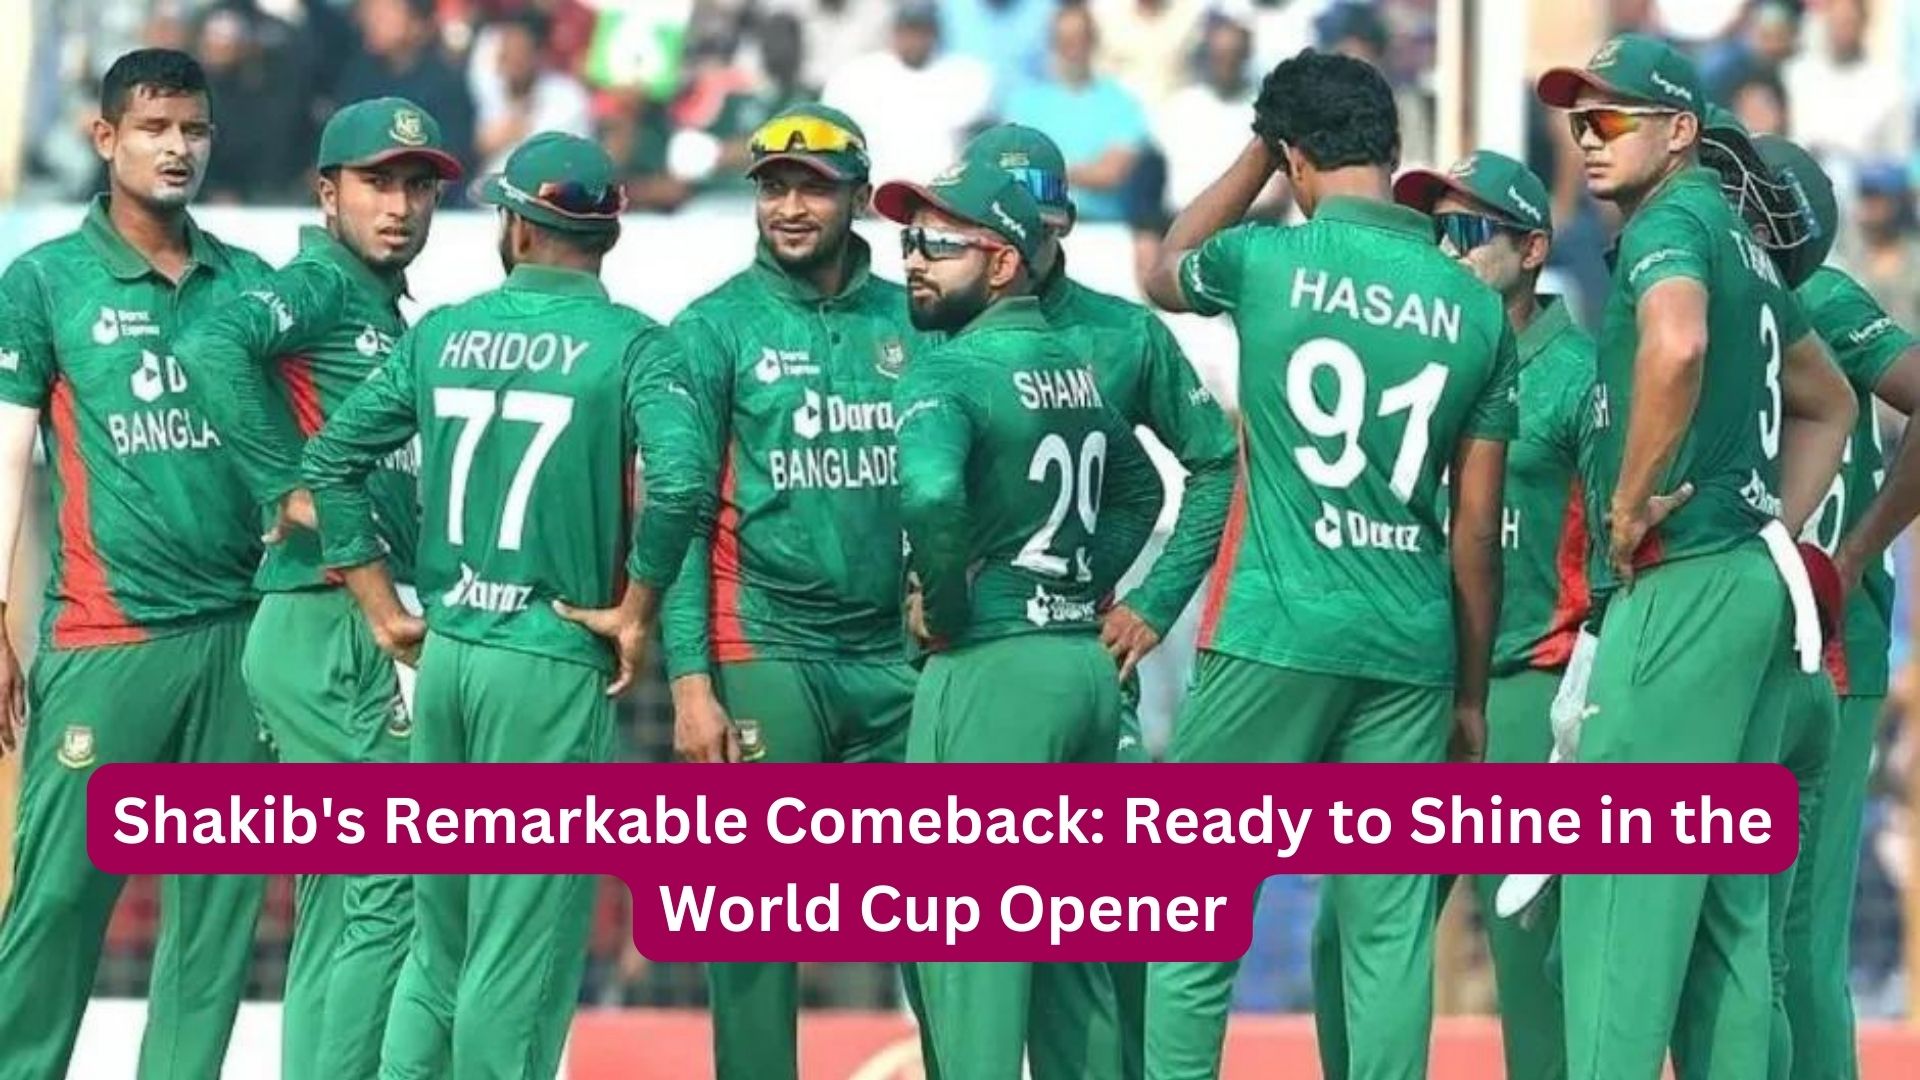 Shakib's Remarkable Comeback: Ready to Shine in World Cup Opener